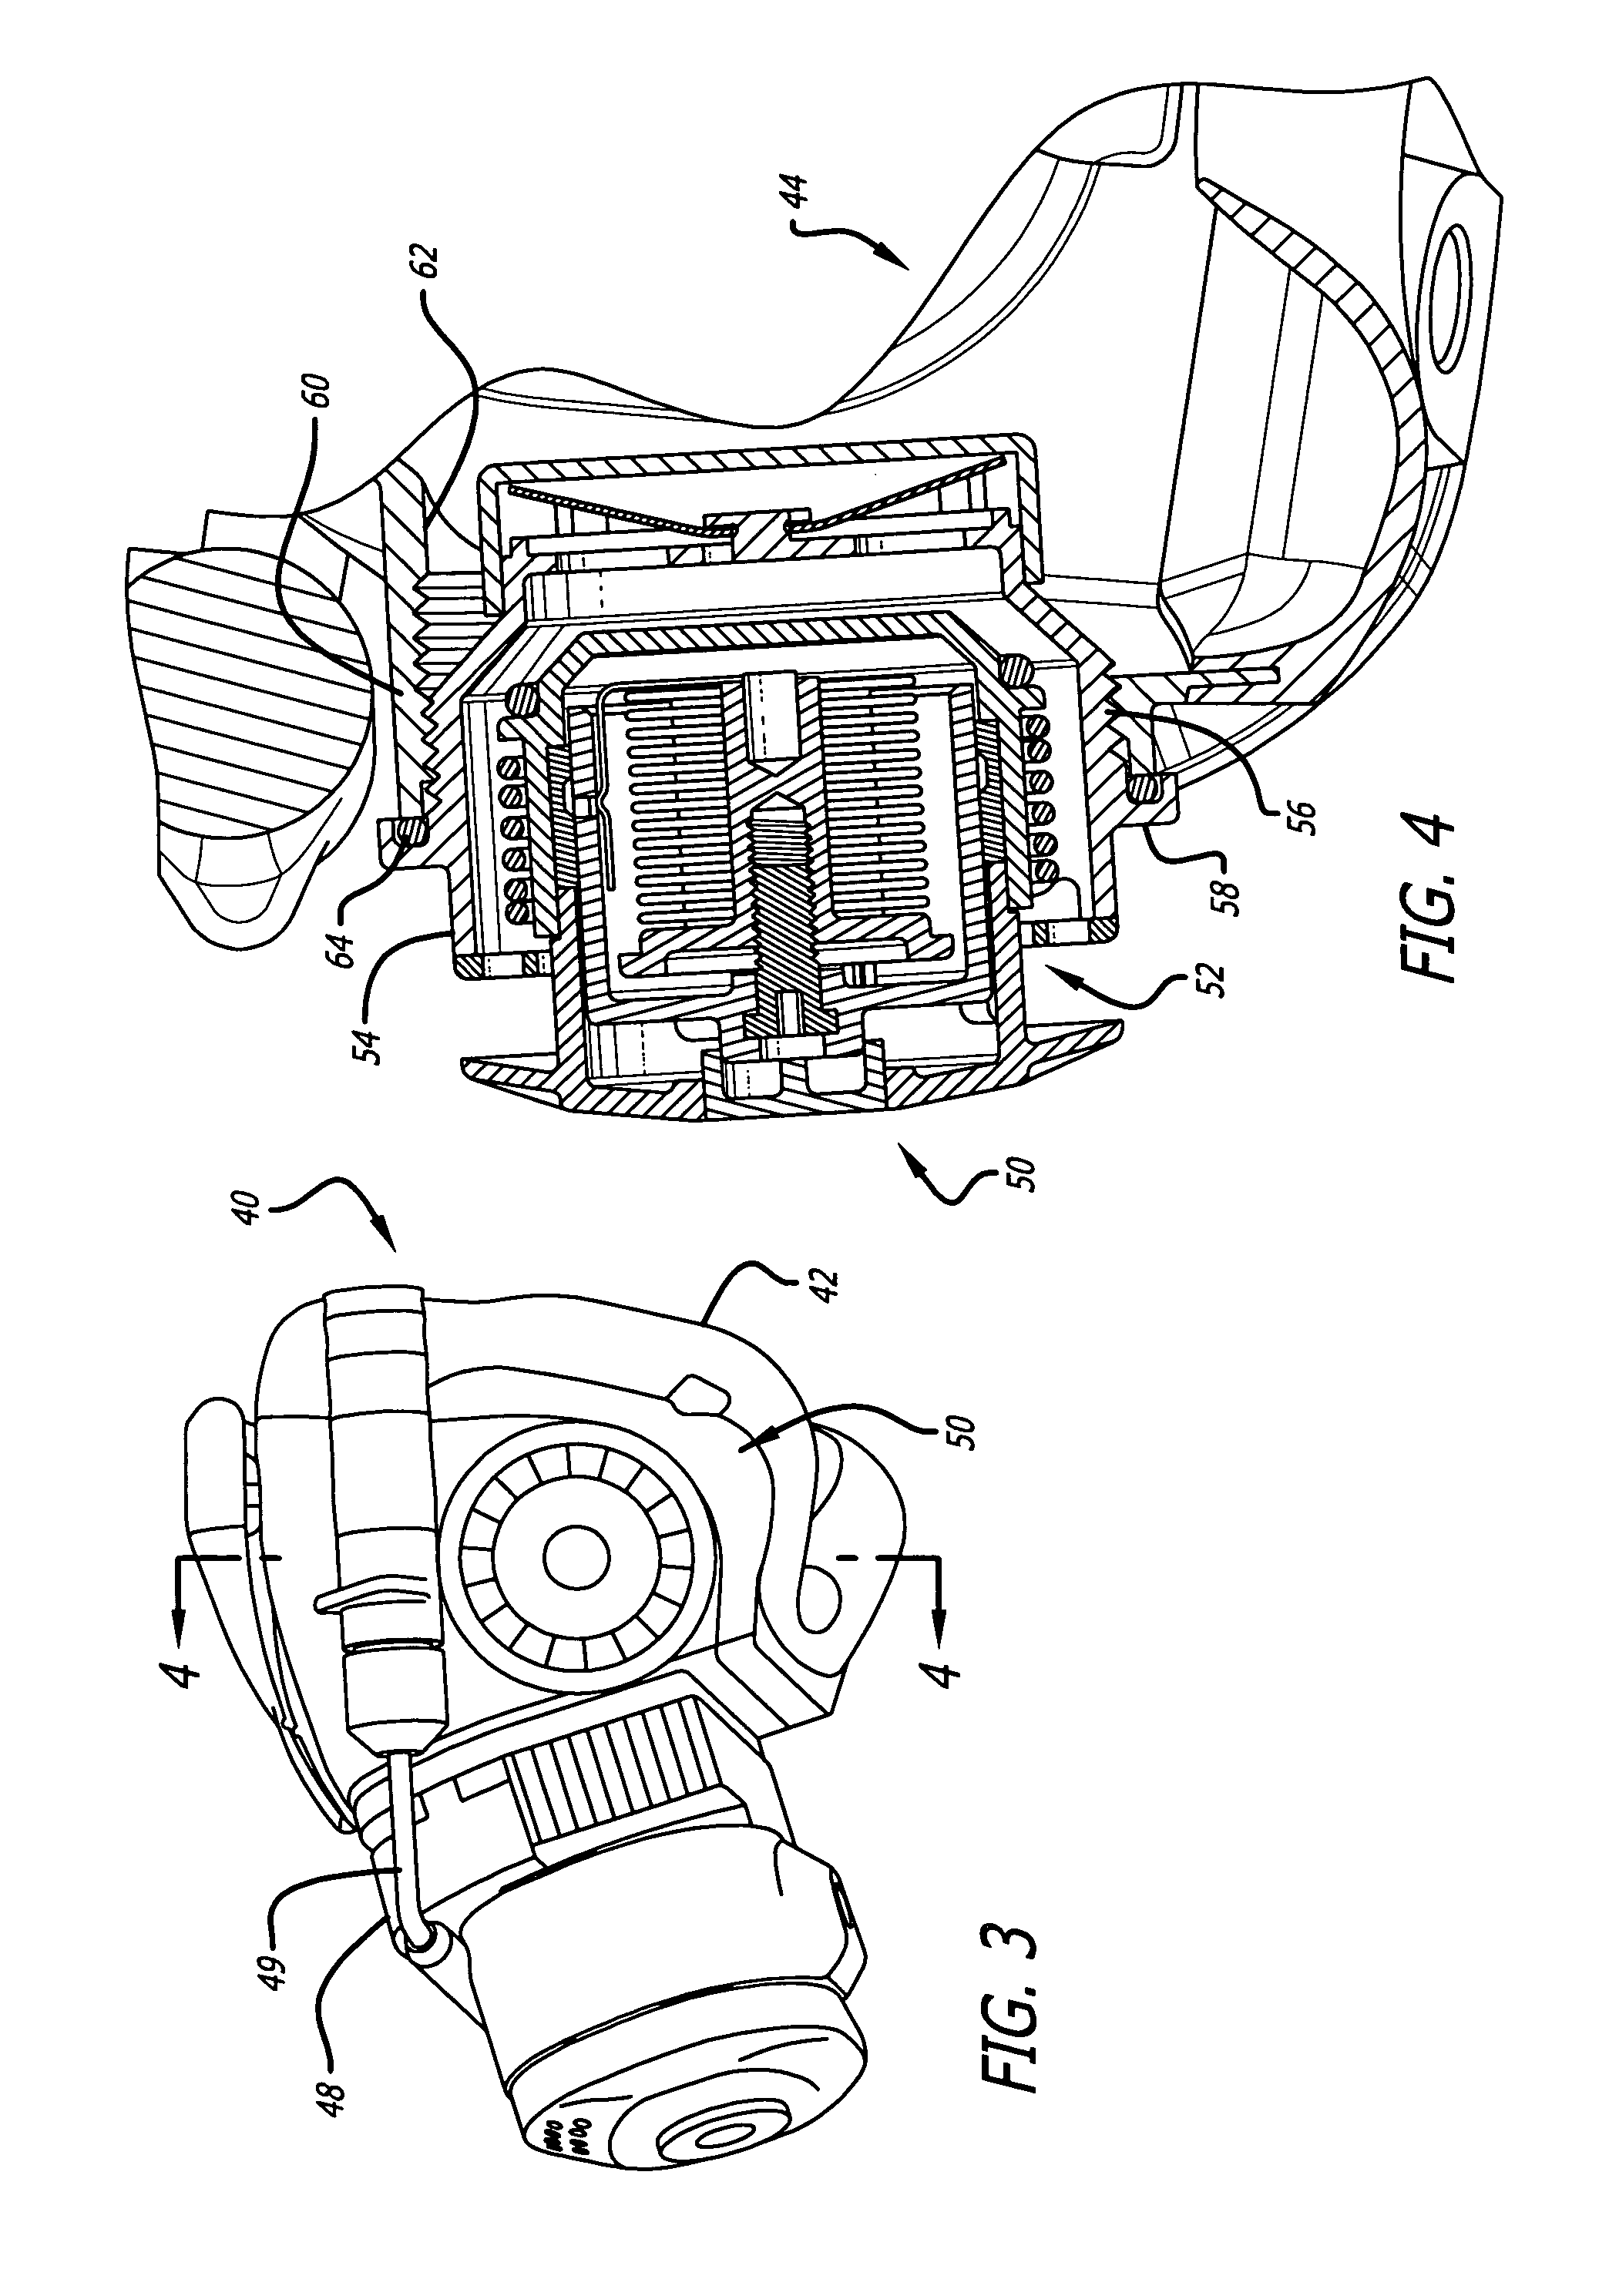 Breathing mask and regulator for aircraft